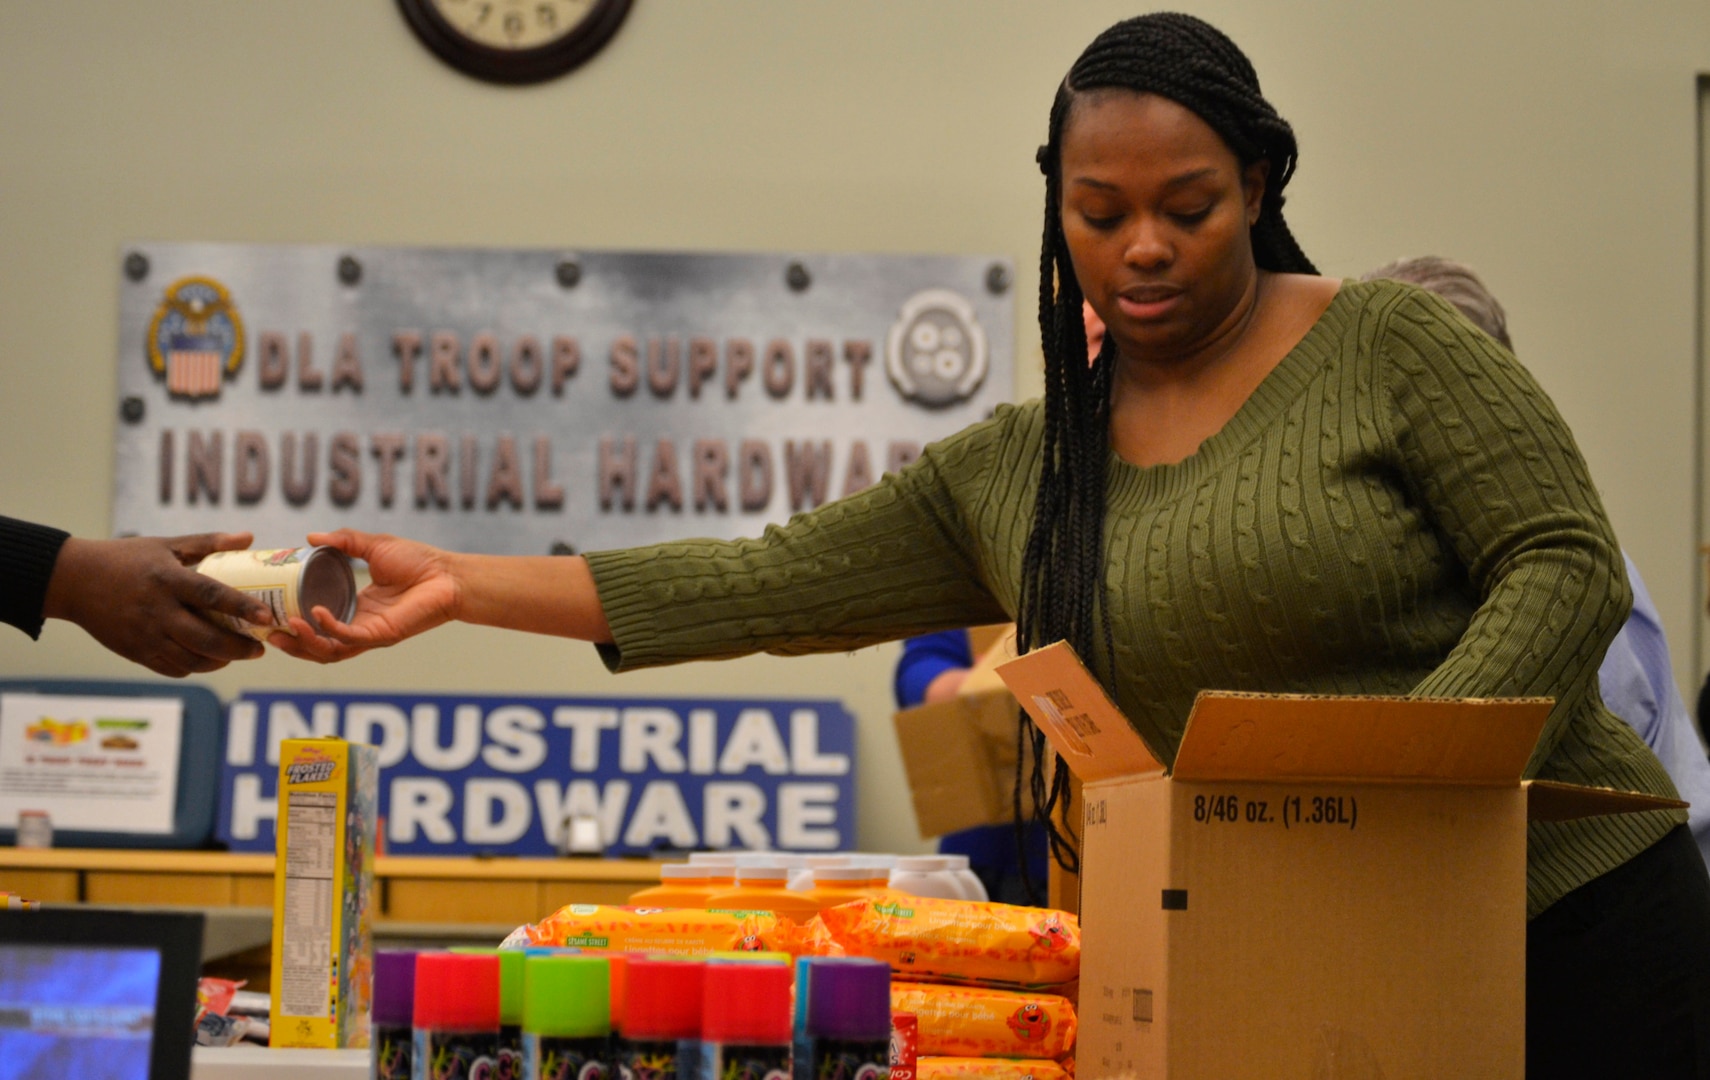 DLA Troop Support Industrial Hardware employee and “IH Trooper” Temecca Baen places items in a “Trooper Treat Box” care package March 6, 2019 in Philadelphia.